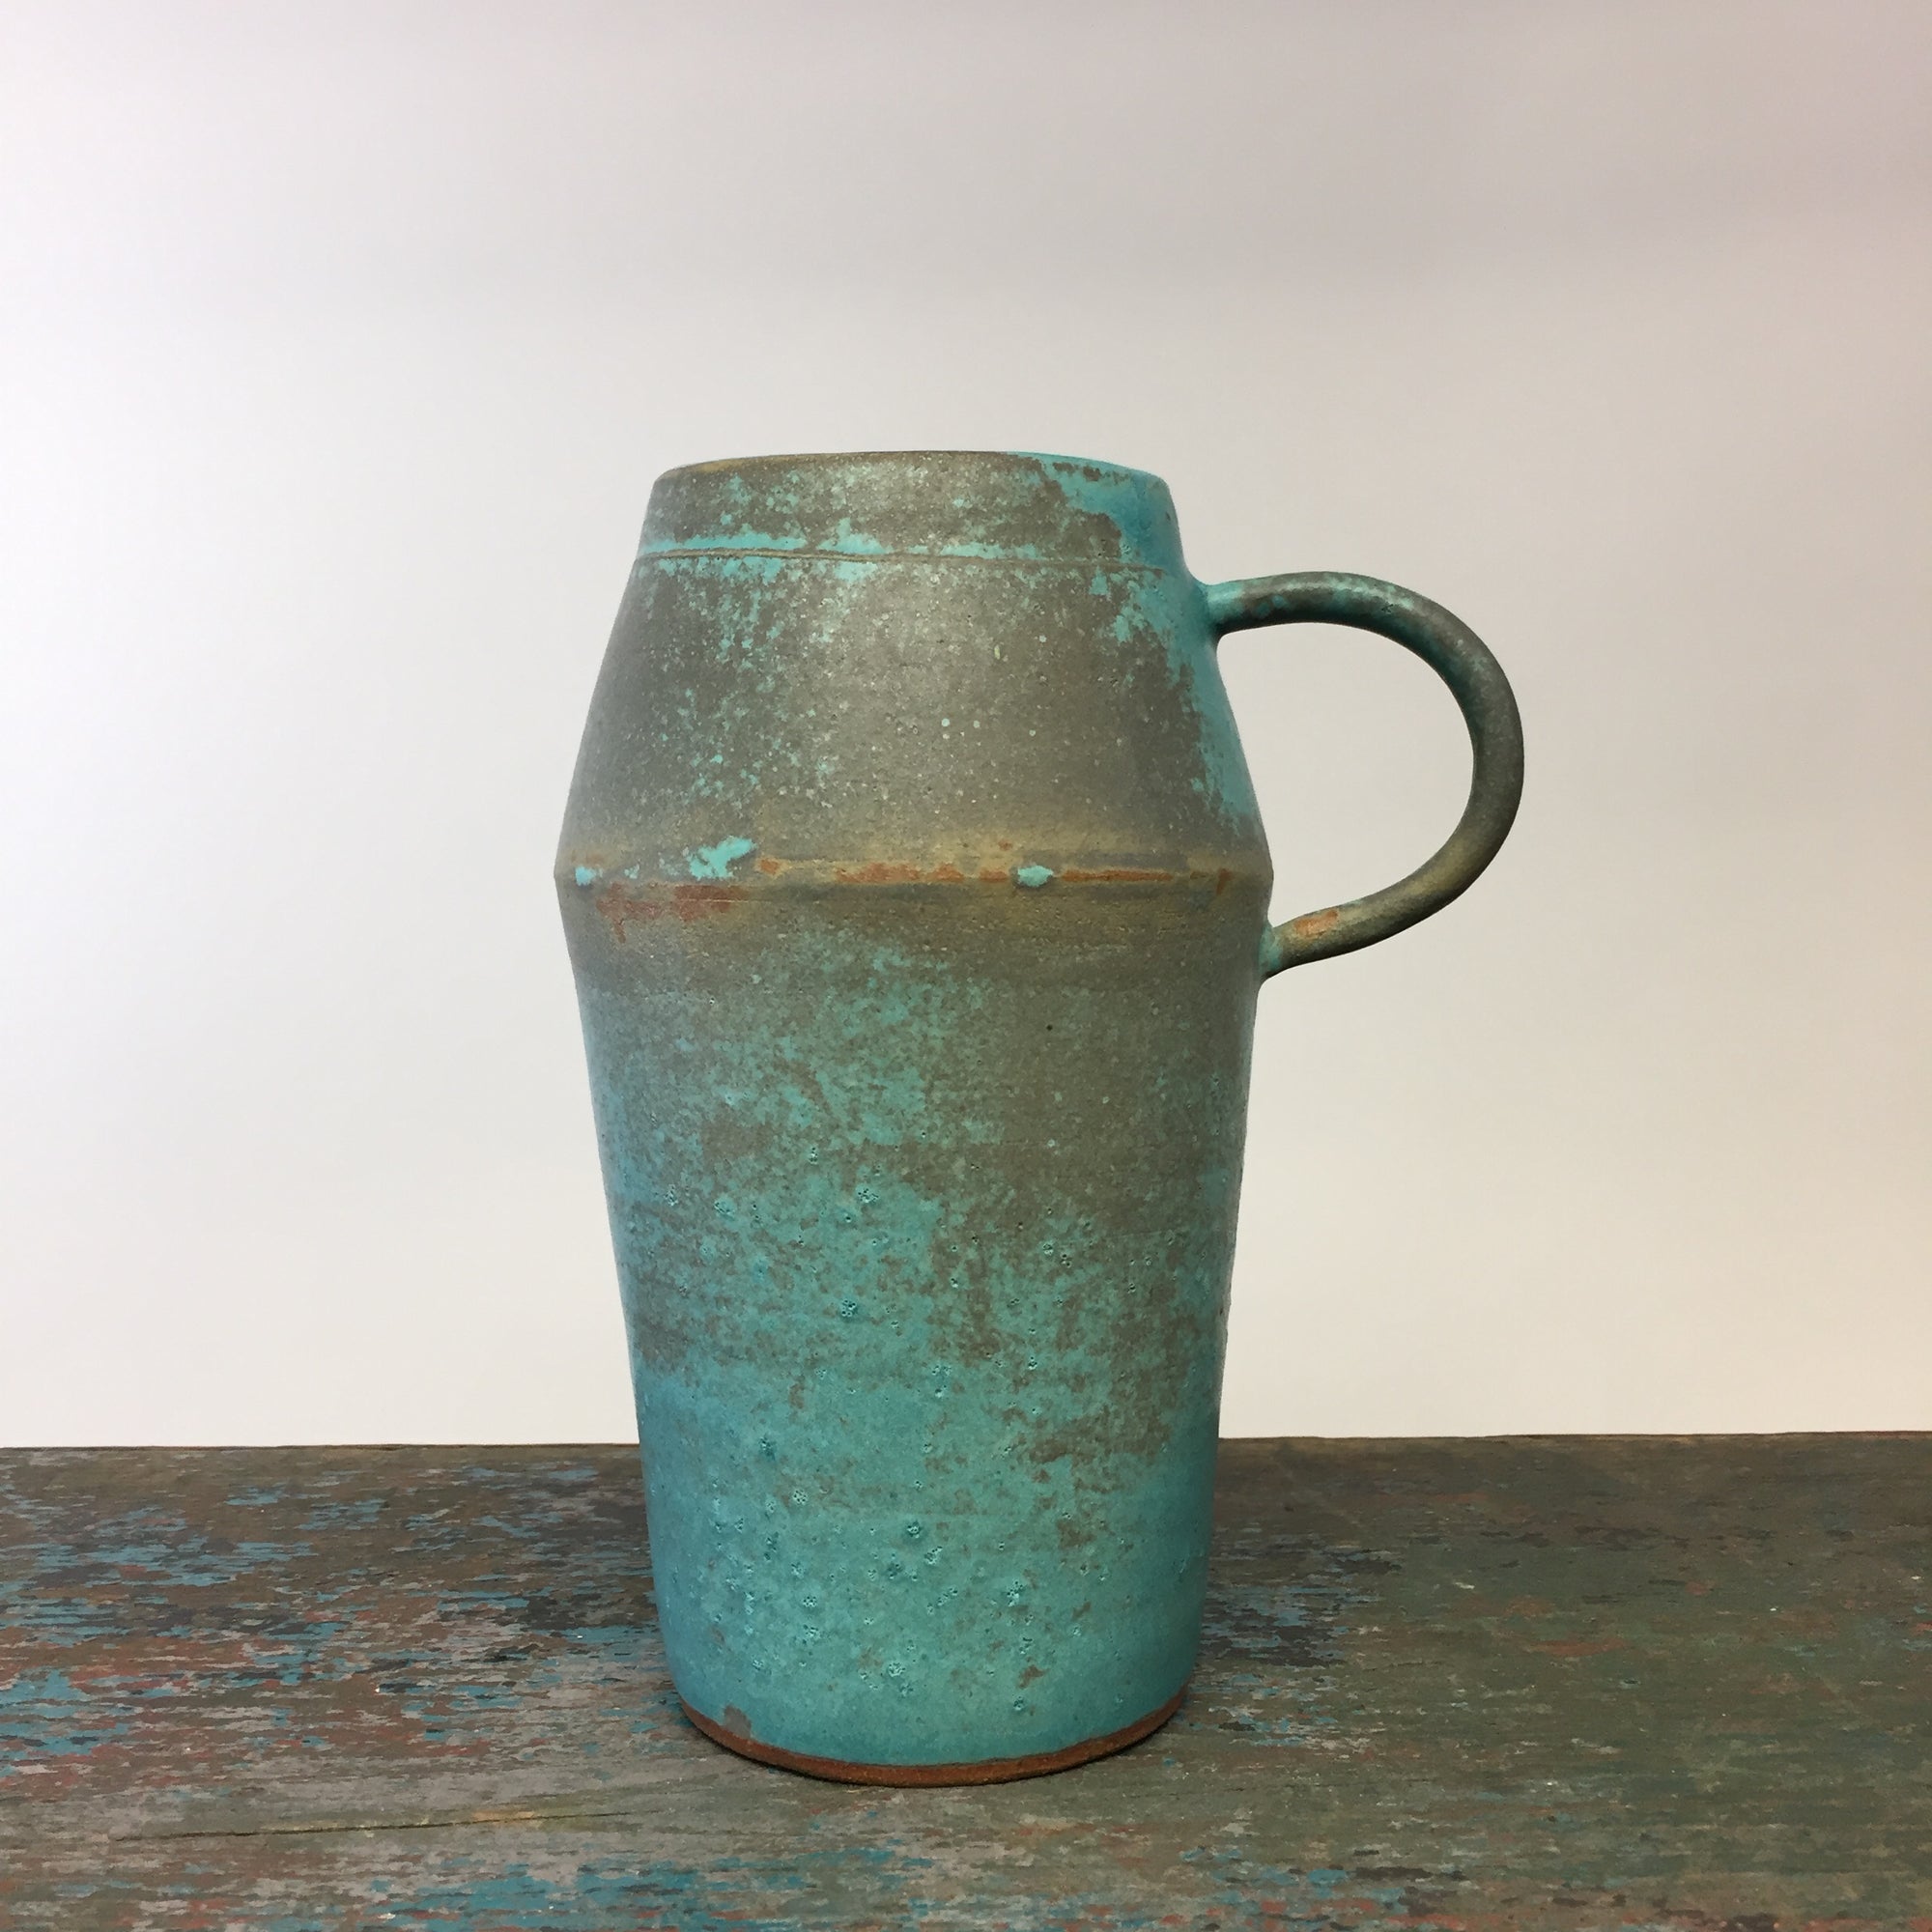 Ceramic Angled Vase with Handle in Robin's Egg Blue